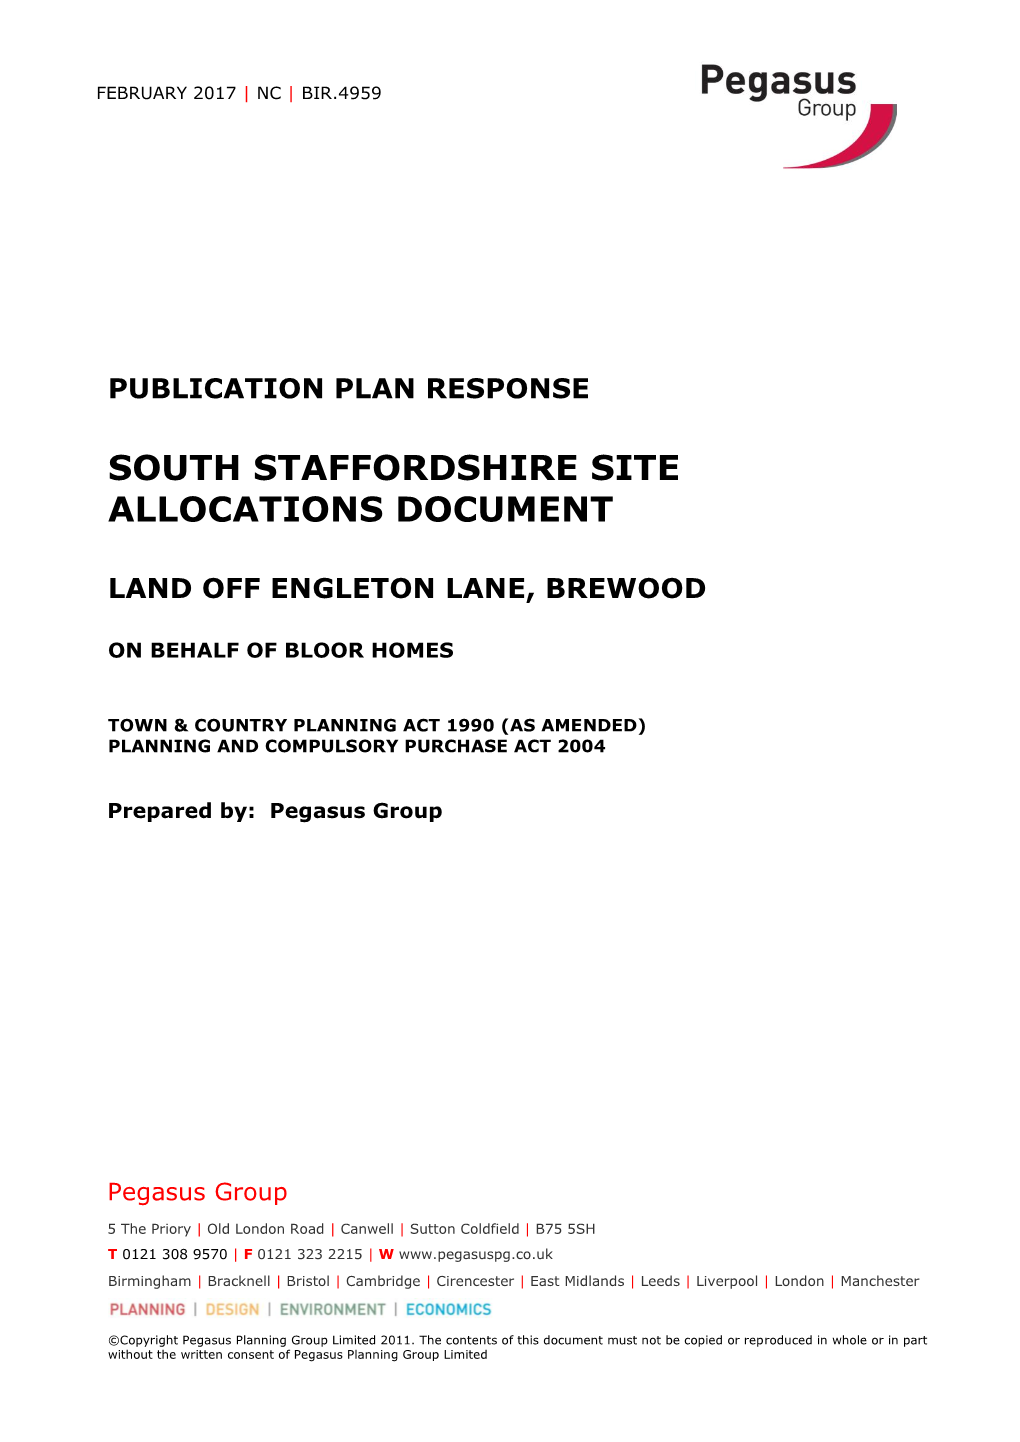 South Staffordshire Site Allocations Document